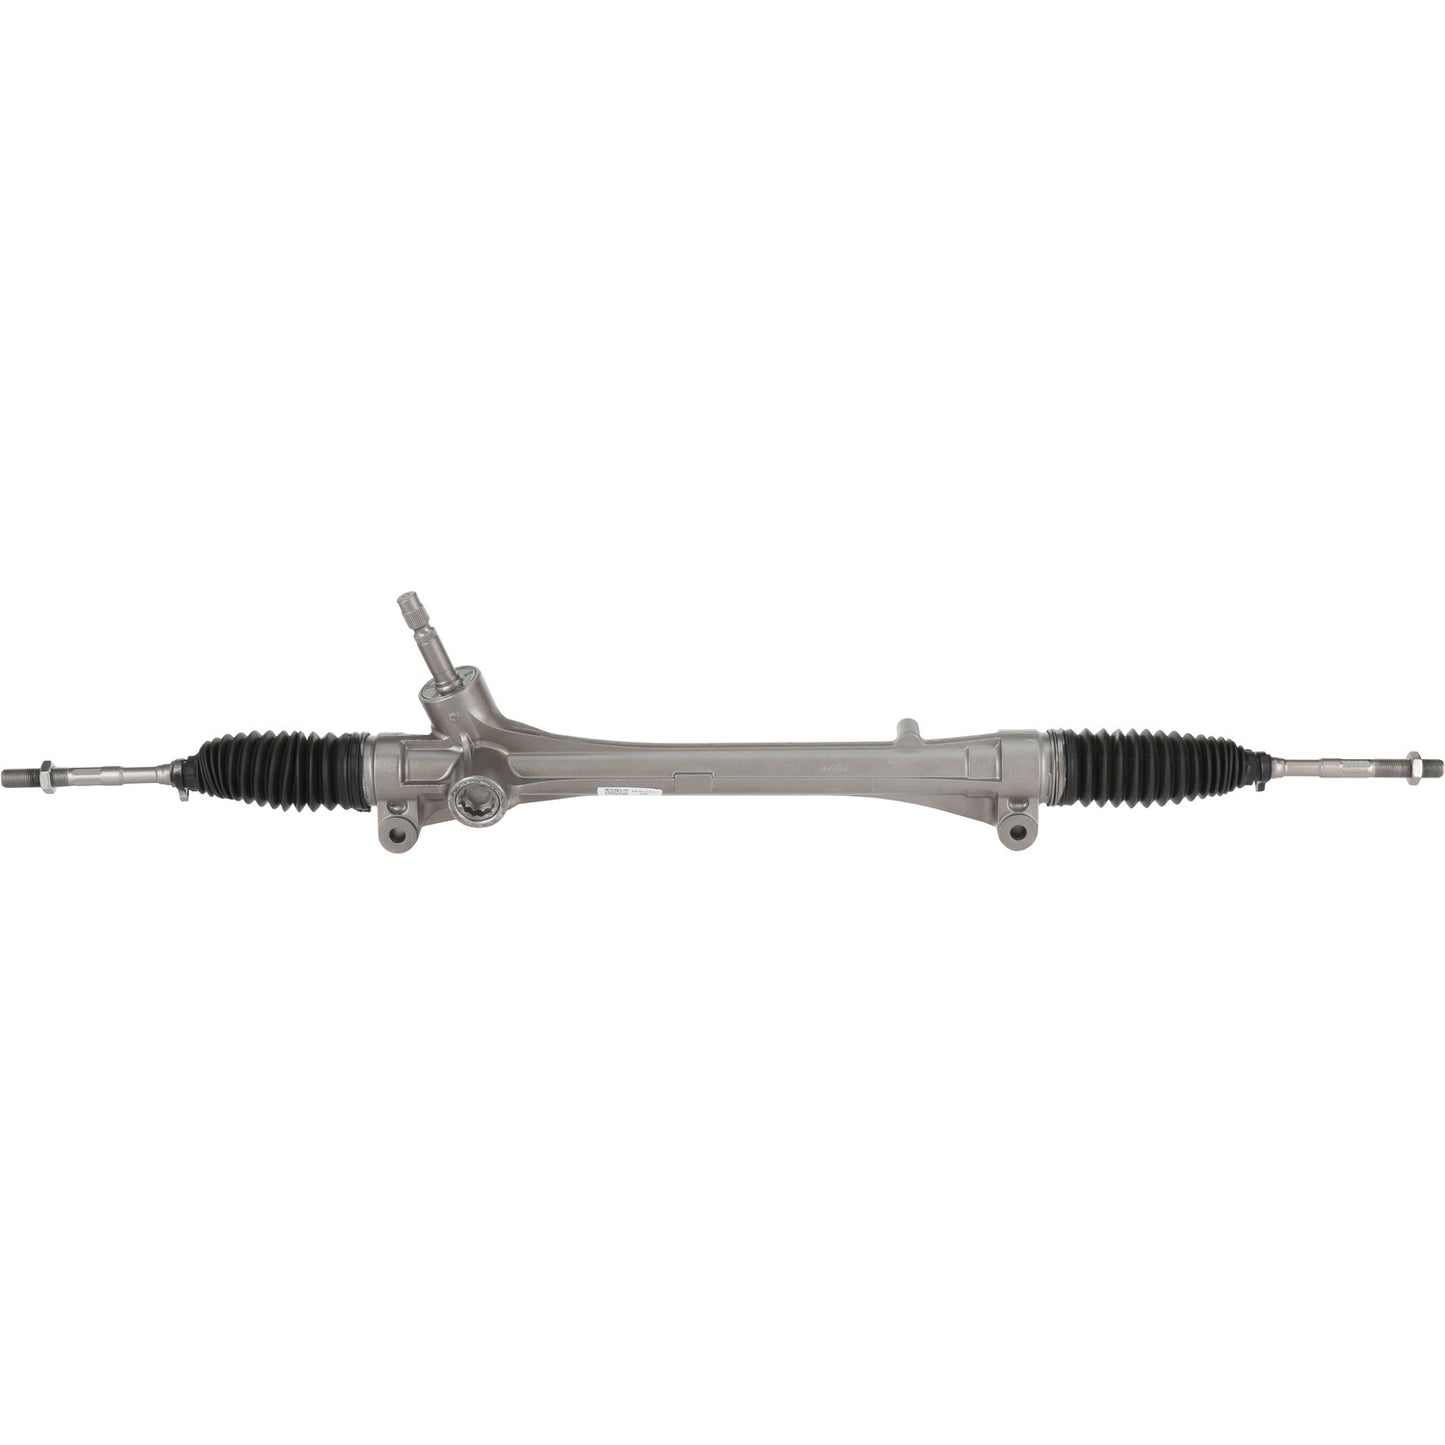 Rack and Pinion Assembly - MAVAL - Manual - Remanufactured - 94358M